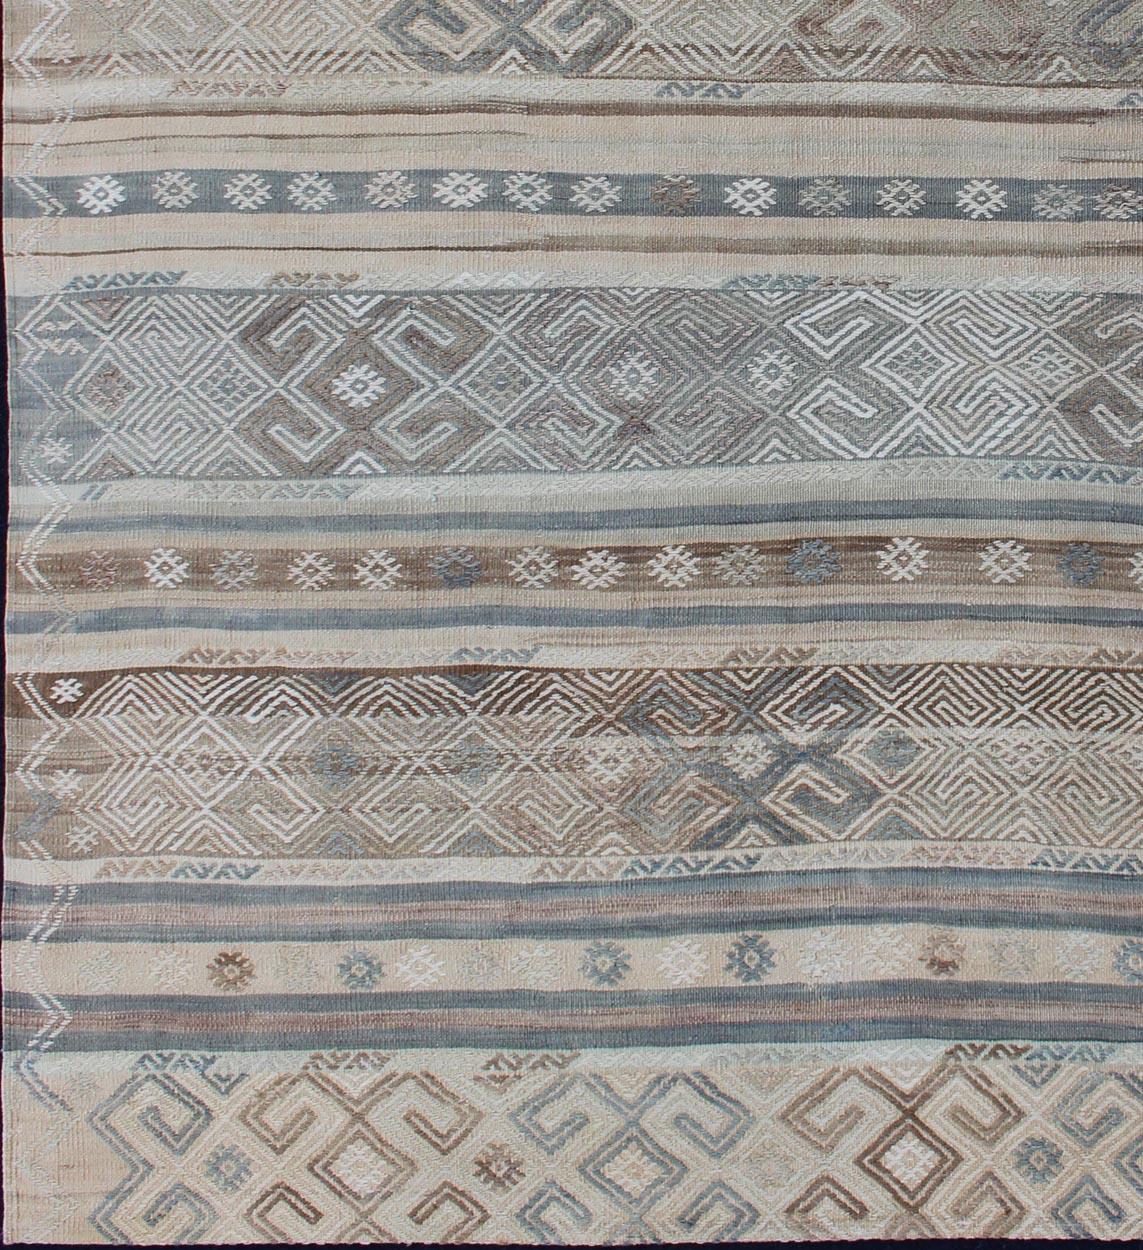 Hand-Woven Striped Hand Woven Turkish Vintage Kilim with Geometric Designs For Sale